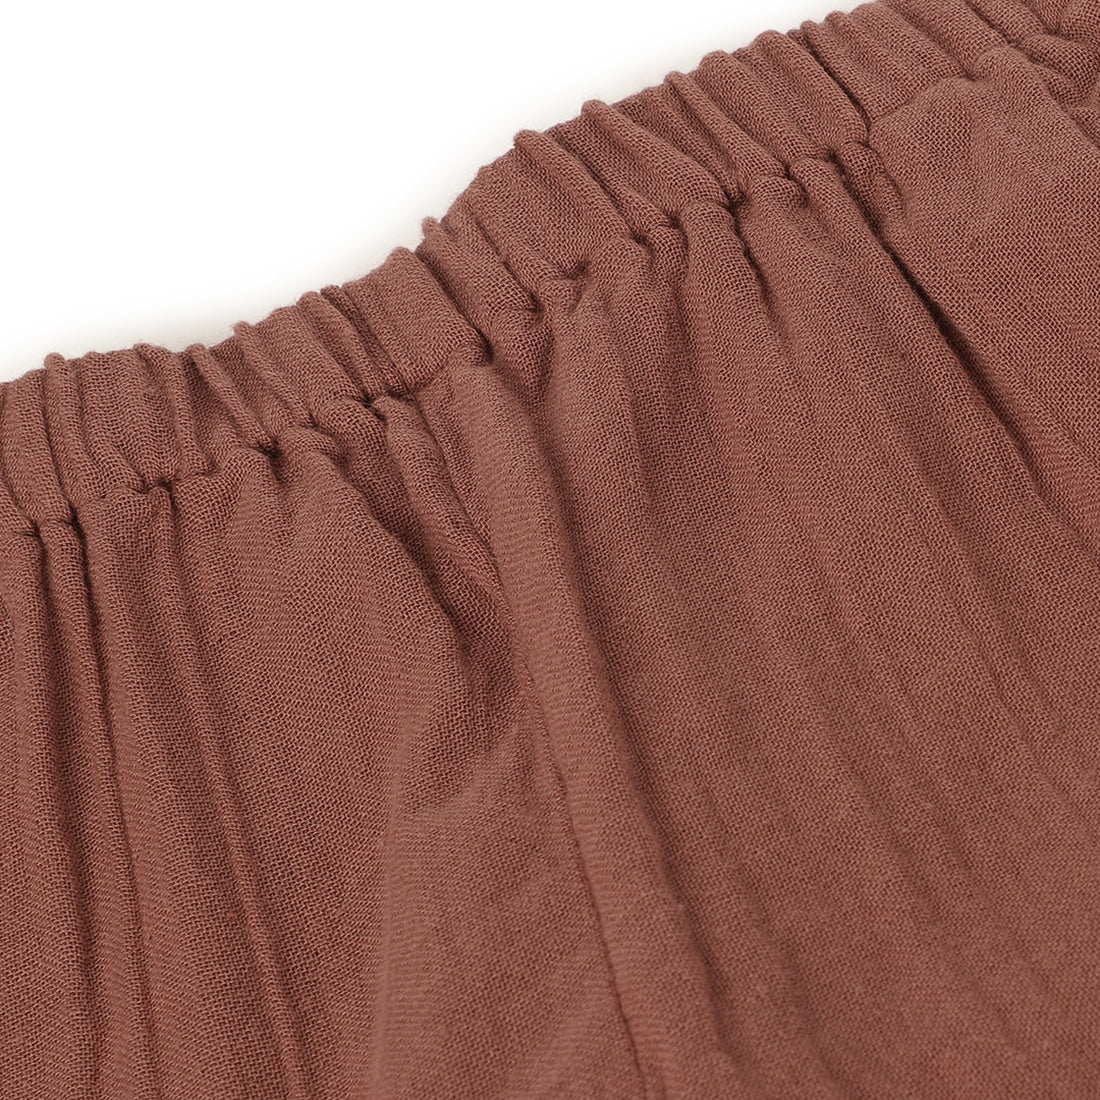 Pants for Boys and Girls , Brown - Close up Image